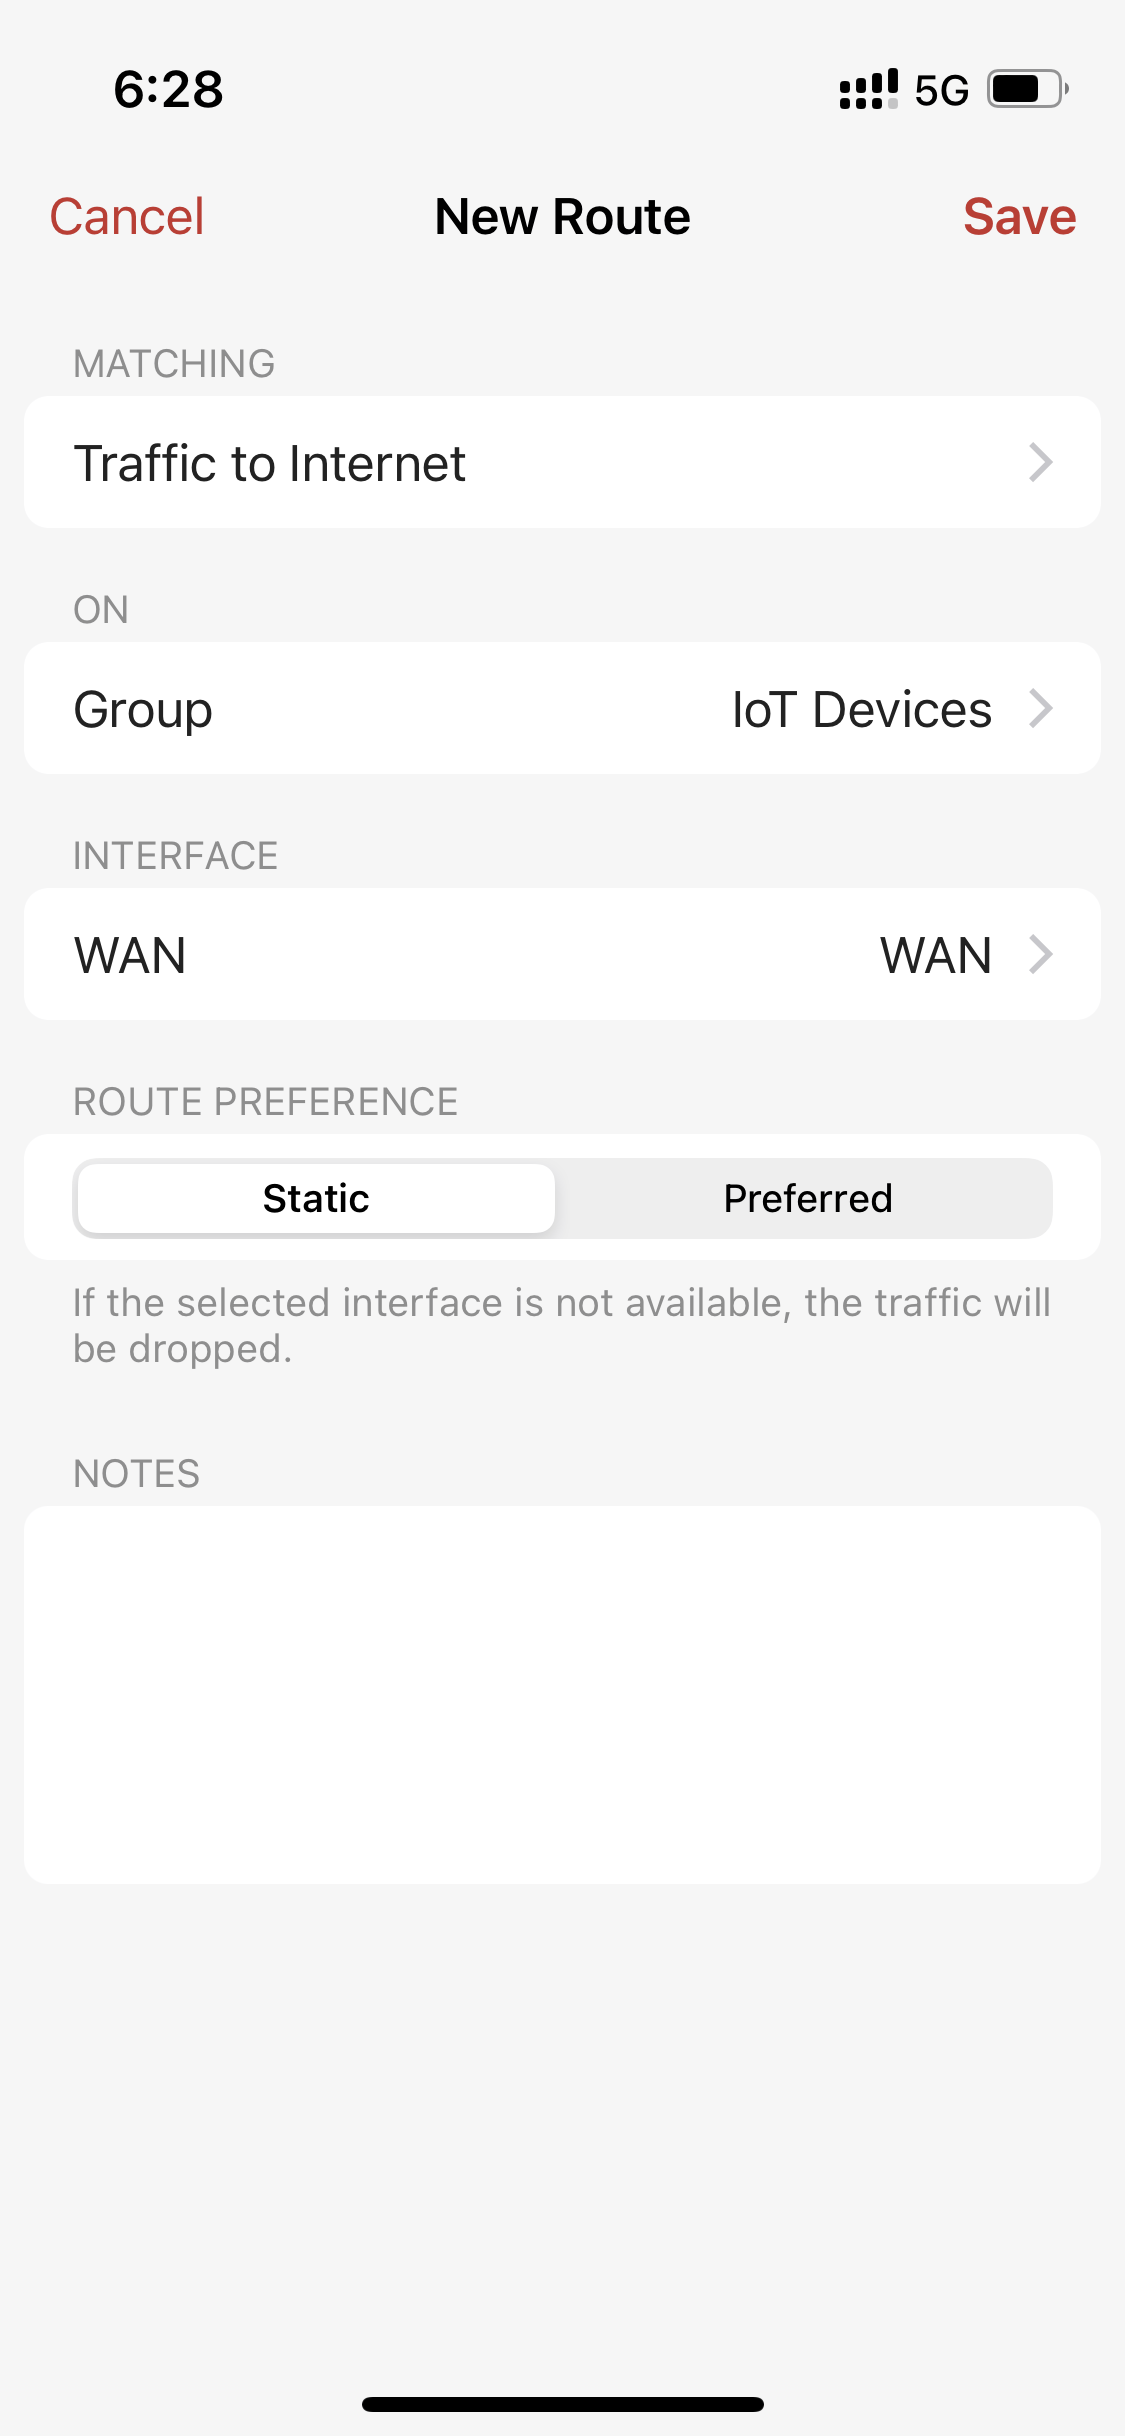 Firewalla route matching Traffic to Internet on chosen IoT device experiencing problems